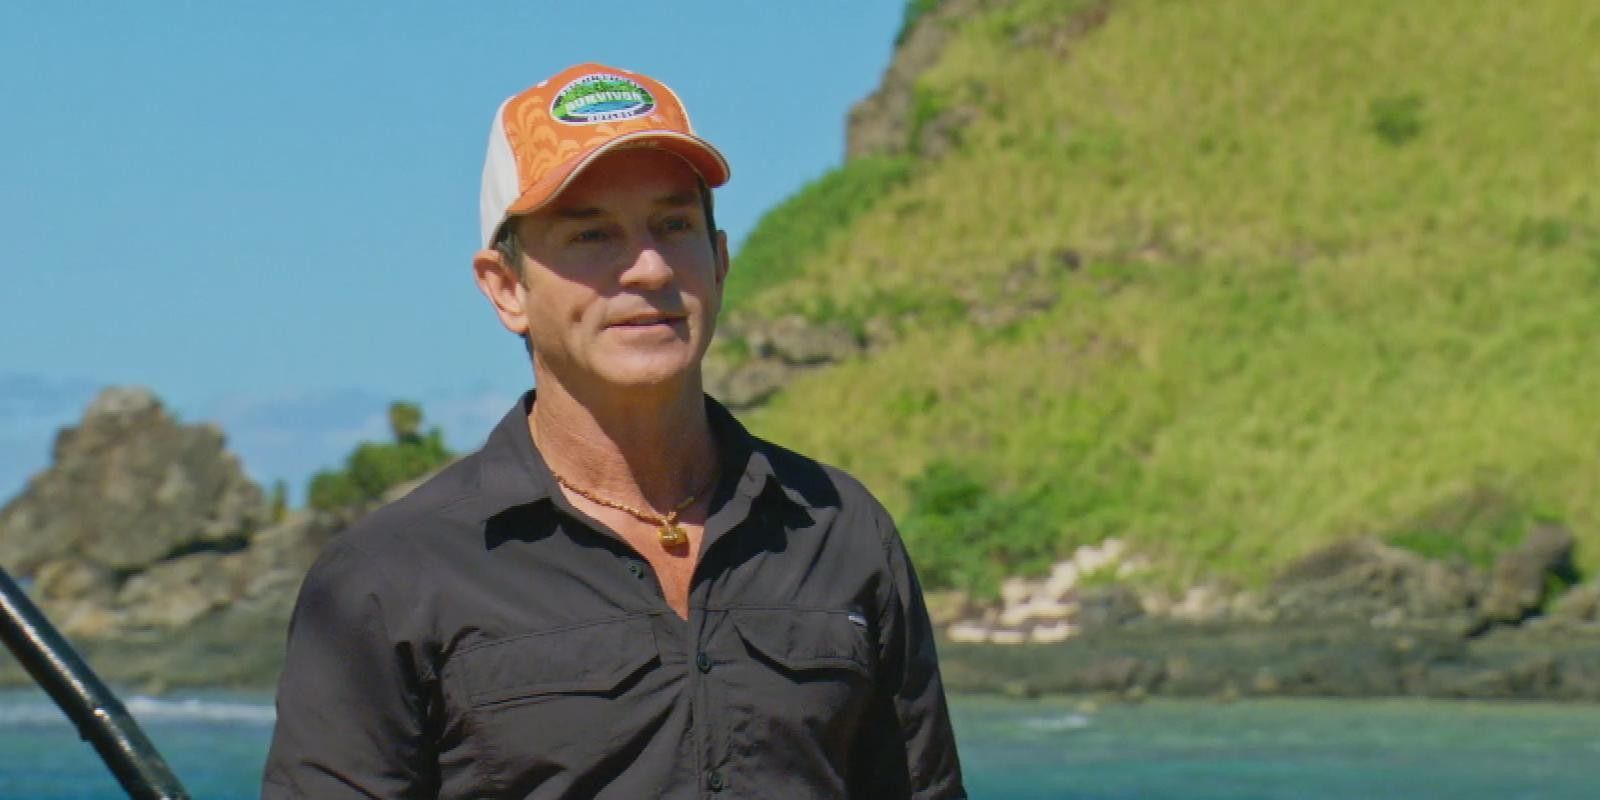 Survivor host Jeff Probst teases that the next season of Survivor will have the strongest women the show has ever seen.